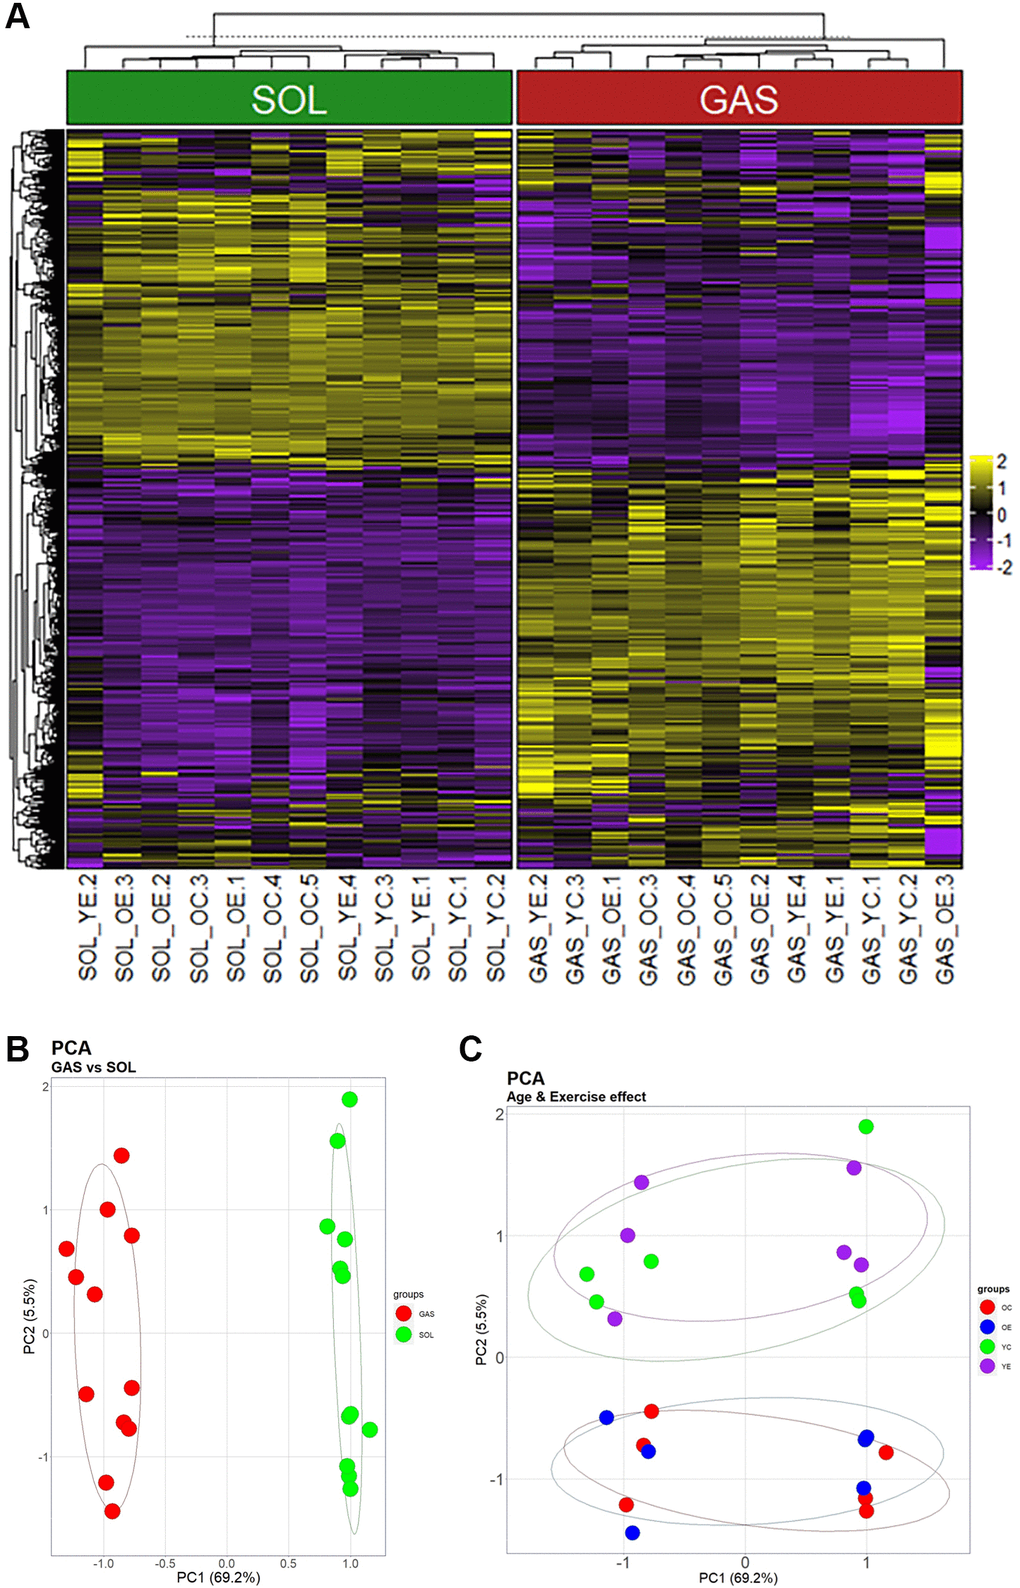 Heatmap and PCA showing the effects of muscle fiber type, aging, and exercise on gene expression. (A) Heatmap using the 1268 genes that passed screening. (i) Values for genes with median value of B) and (C) are the same plot, but they were clustered by another PC. (B) Clusters separated by PC1 (69.2% of total variance) (C) Groups divided by PC2 (5.5% of total variance).